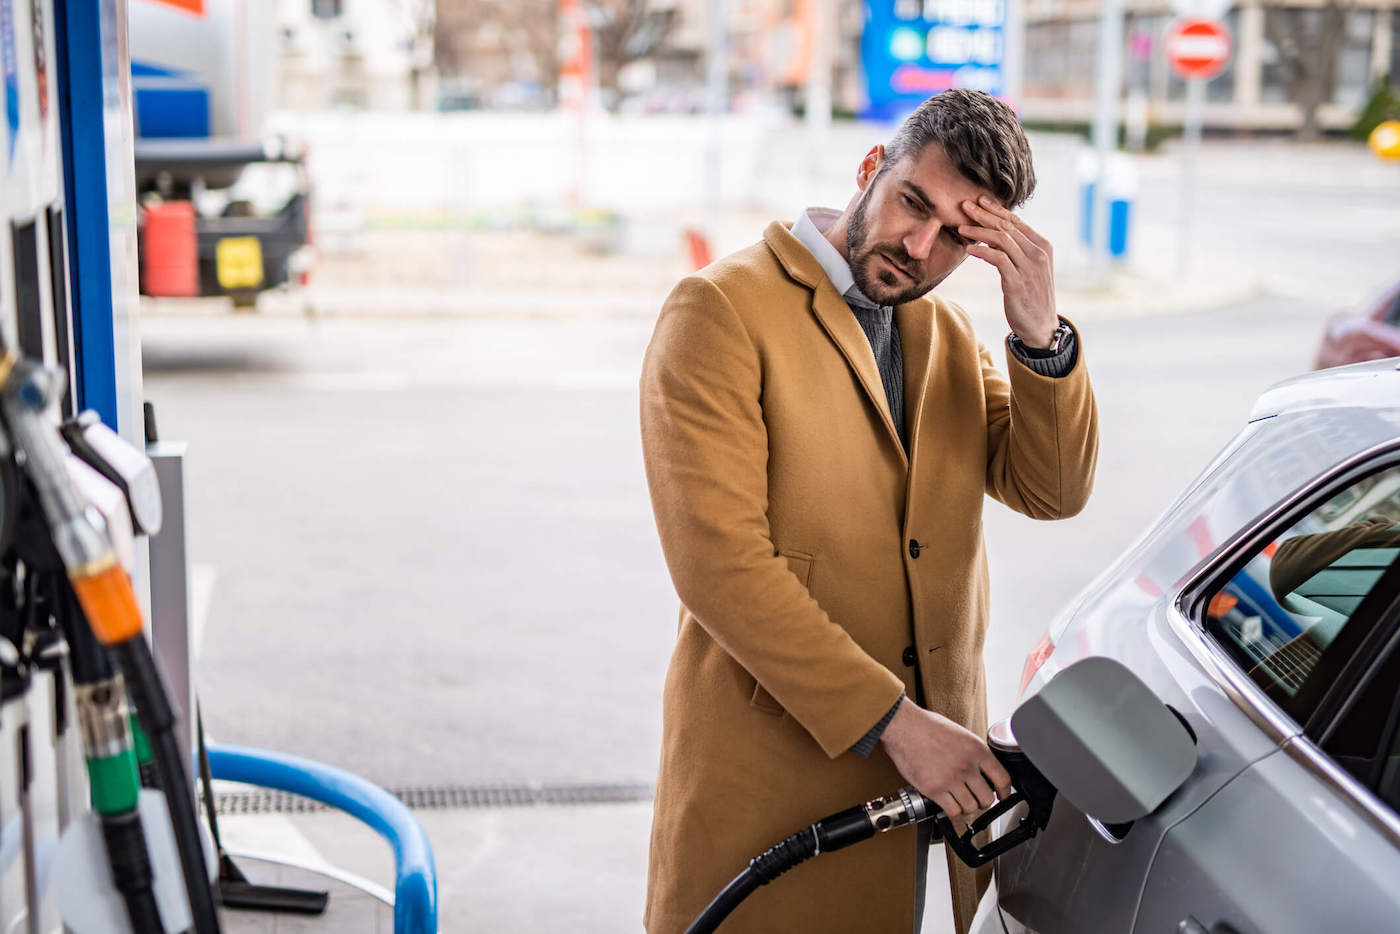 Man Has Hands On His Head While Pumping Gas In Car